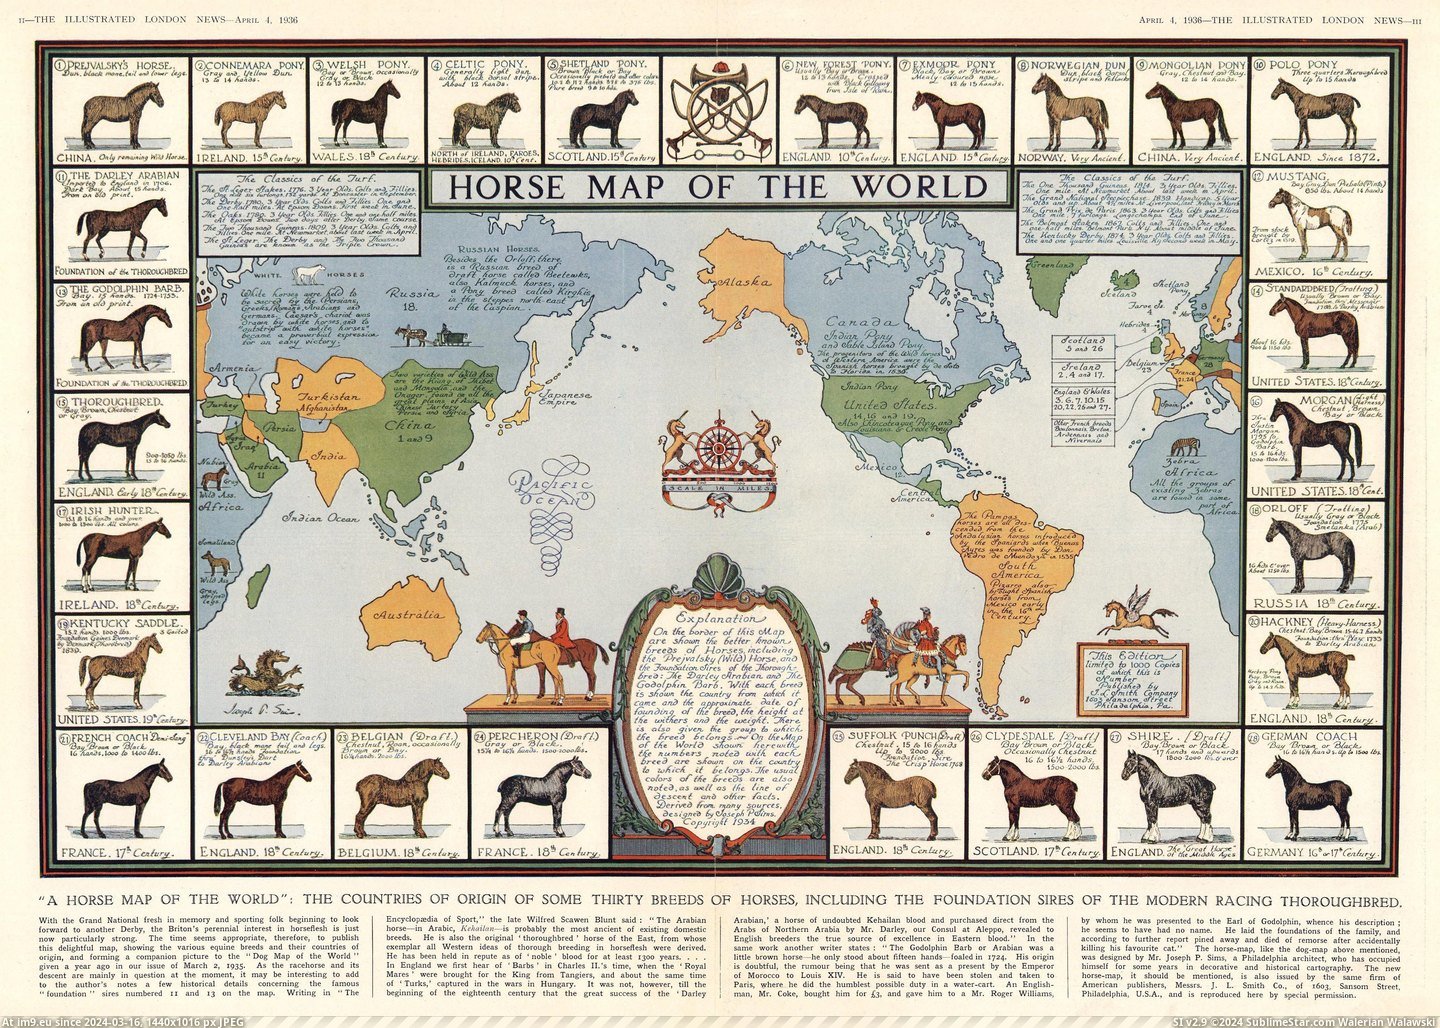 #World #Map #Countries #Origin #Foundation #Breeds #Horse #Including #Horses [Mapporn] Horse Map of the World: The countries of origin of some thirty breeds of horses, including the foundation sires of the Pic. (Изображение из альбом My r/MAPS favs))